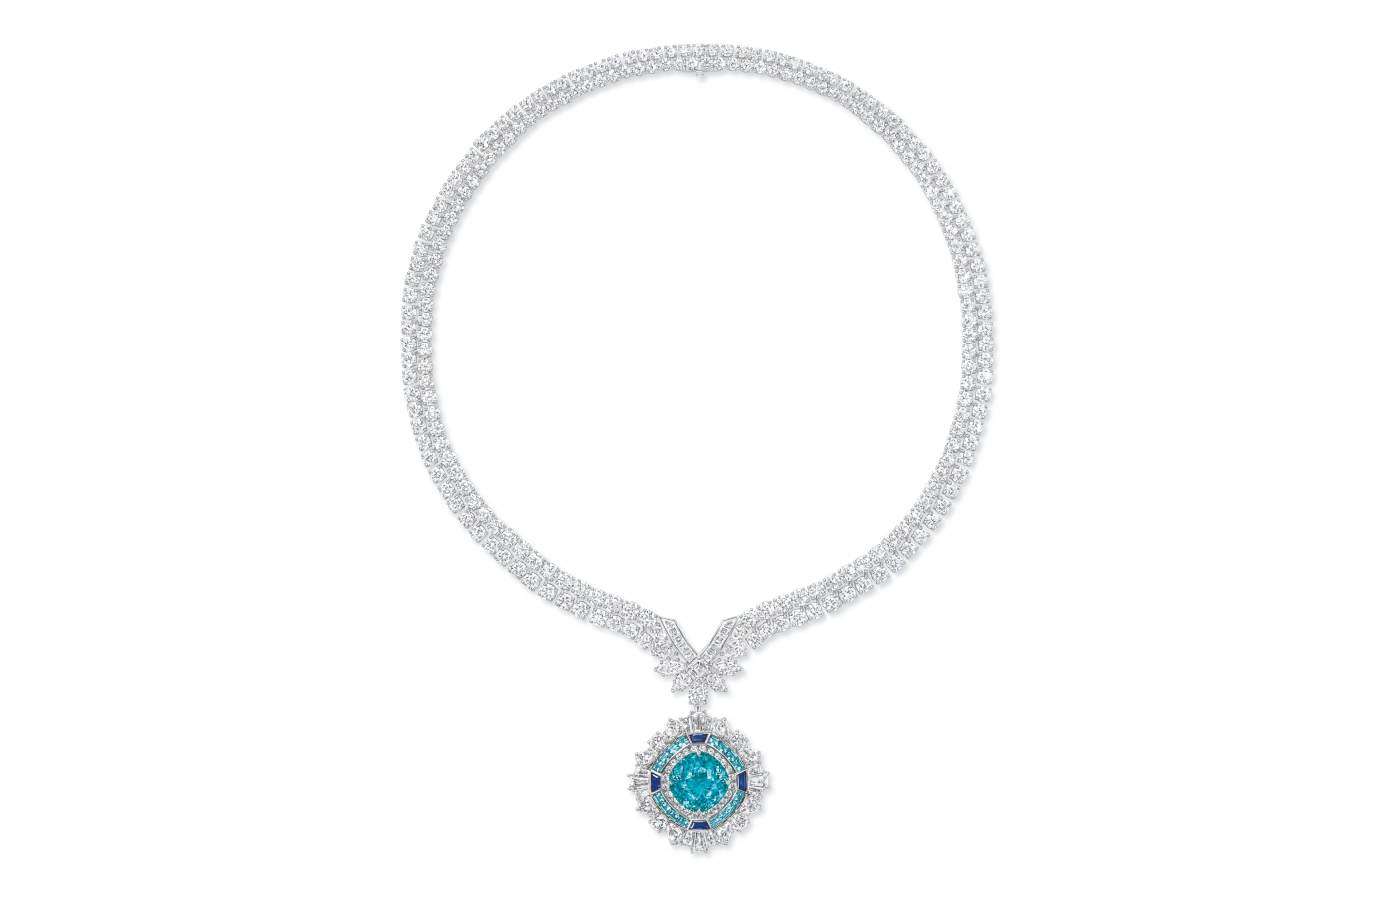 Harry Winston The Idol necklace in white gold, paraiba tourmaline, sapphire and diamond from the Royal Adornments collection